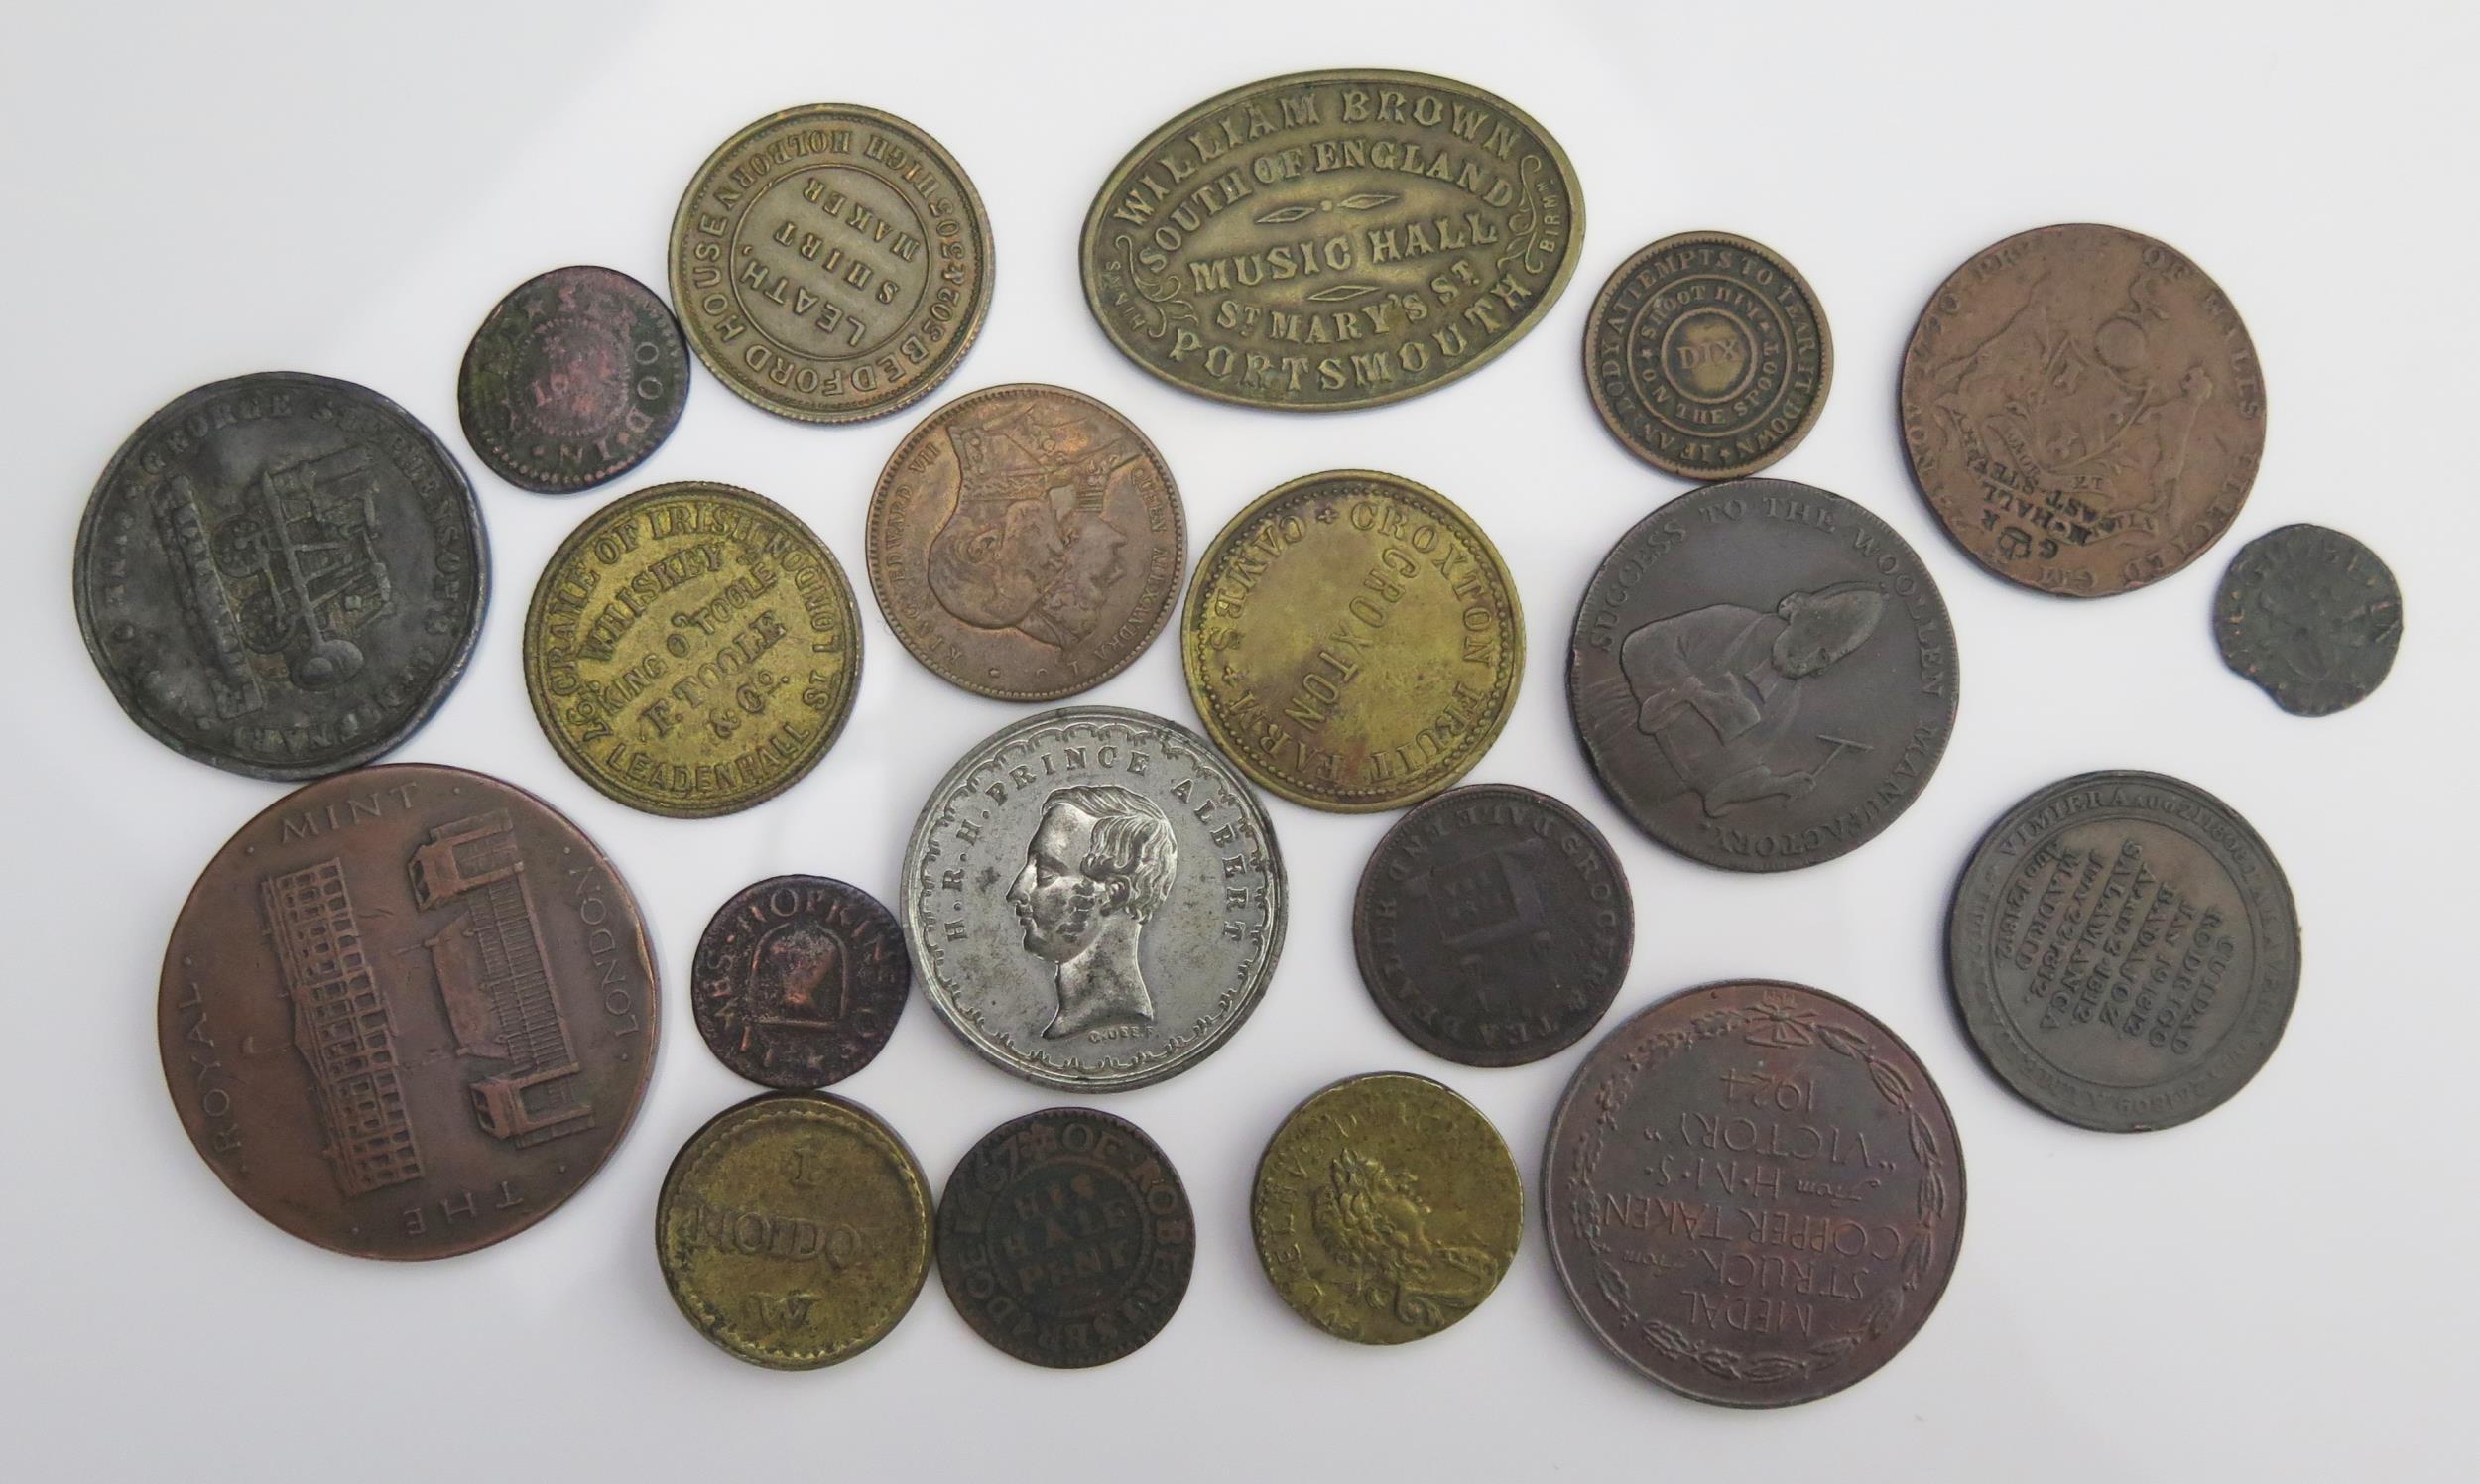 George Stephenson 'Rocket' medallion, William III and Portuguese coin weight, Portsmouth Music